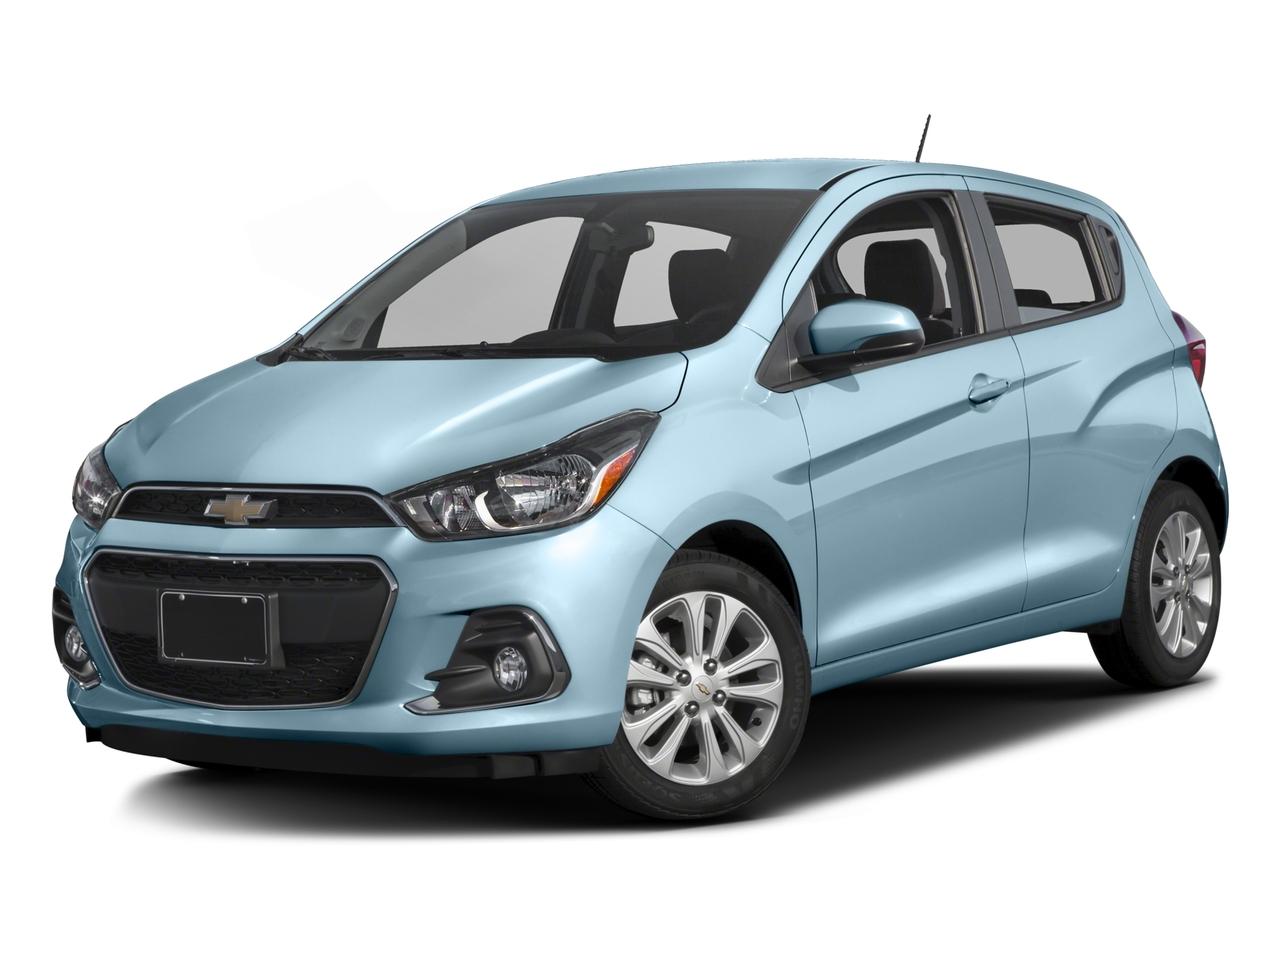 Used 2016 Chevrolet Spark Hatch 1LT (Automatic) for Sale